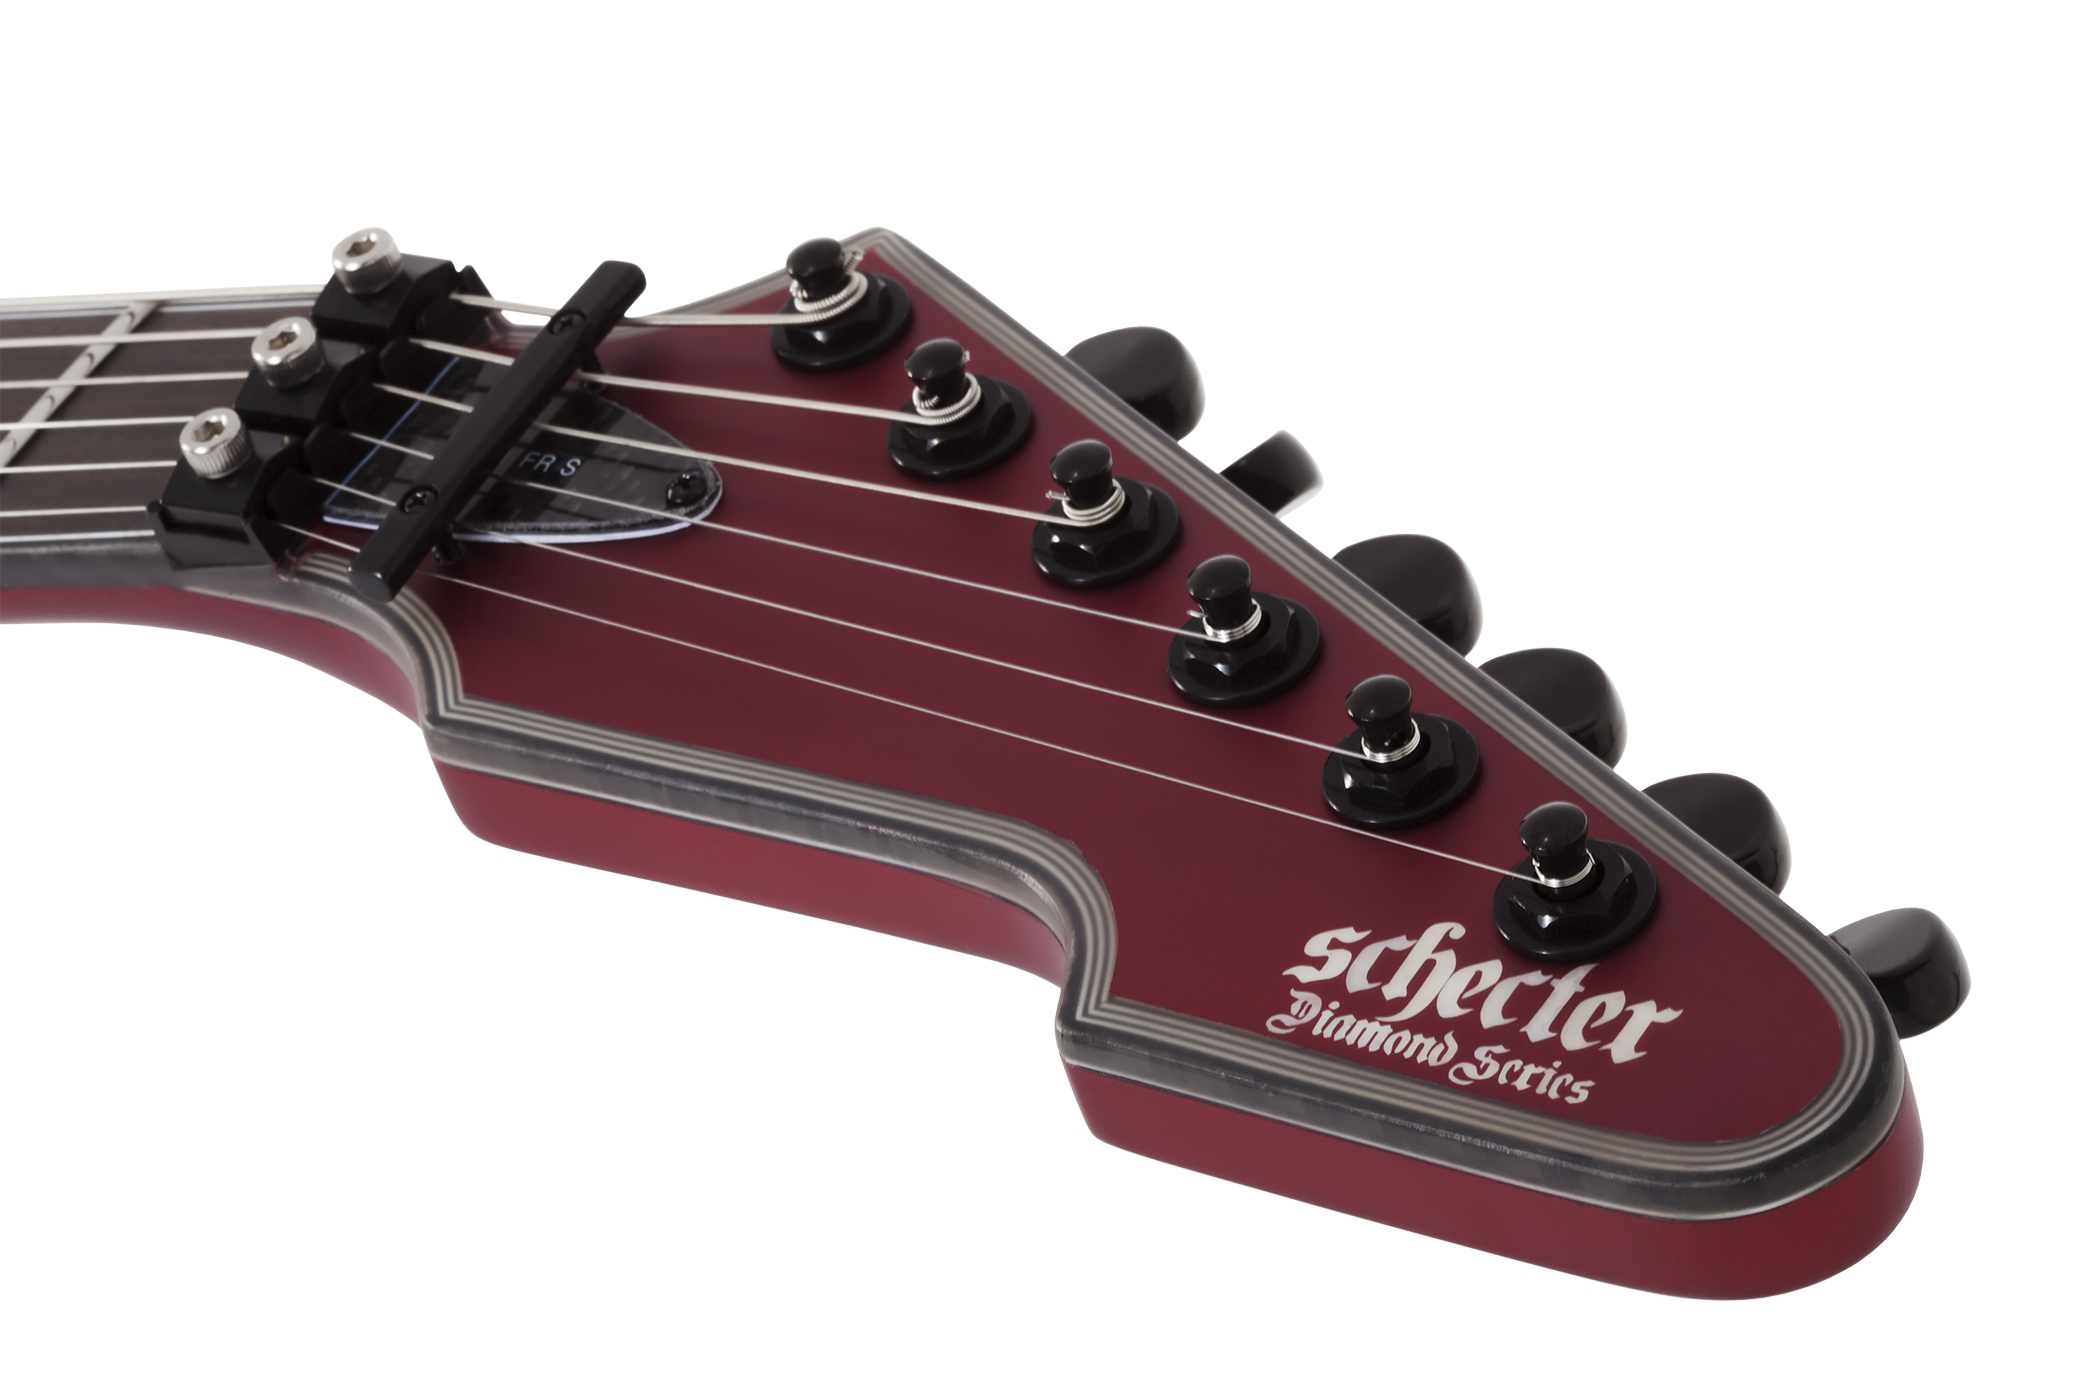 Schecter E-1 Fr S Special Edition 2h Sustainiac Fr Eb - Satin Candy Apple Red - E-Gitarre aus Metall - Variation 5